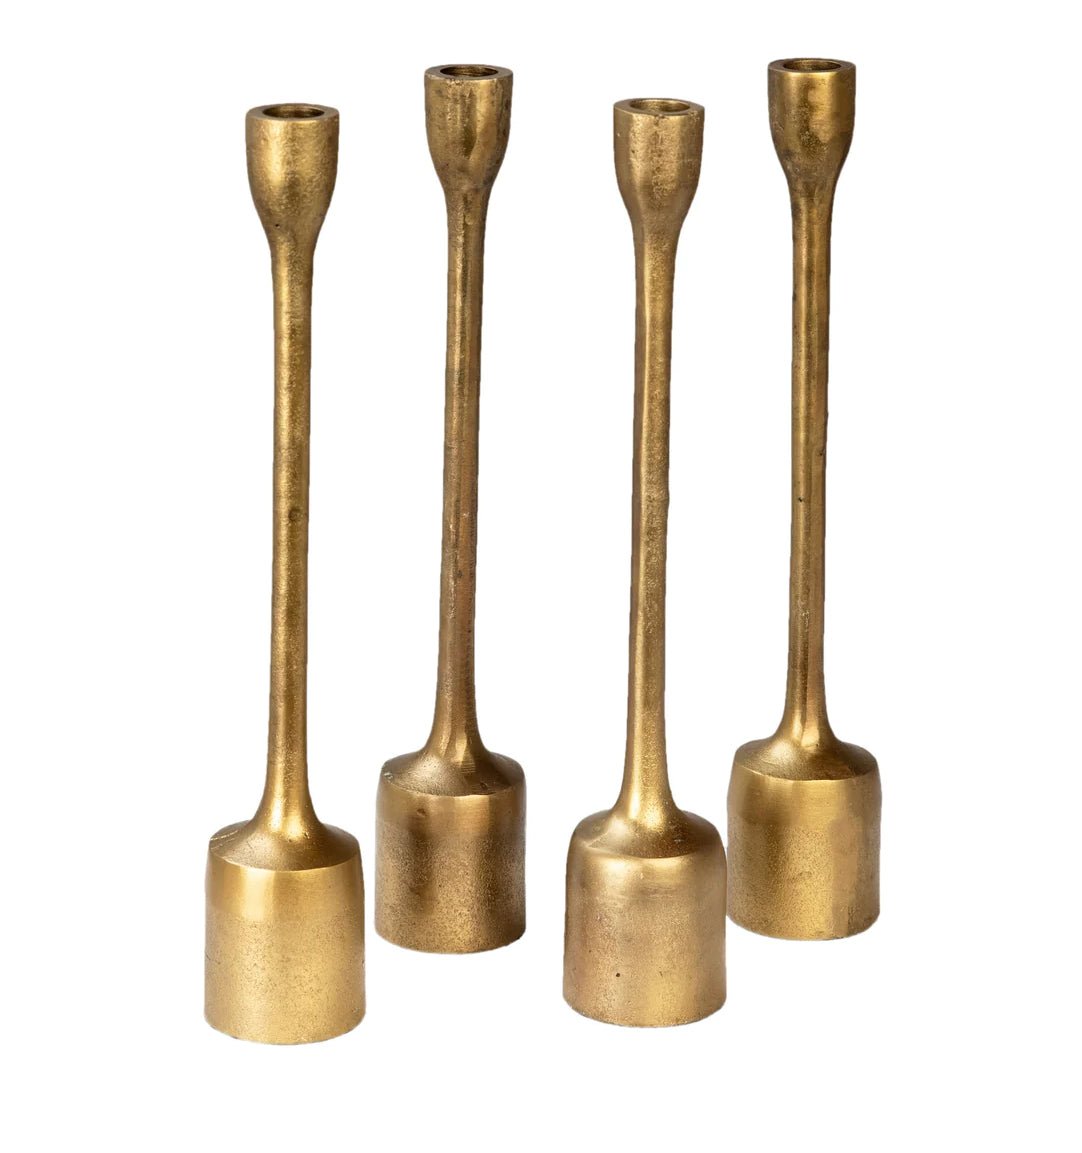 ‘Rawli’ Long Neck Cast Aluminum Candle Stands, Set of 4 (Antique Brass) - EcoLuxe Furnishings